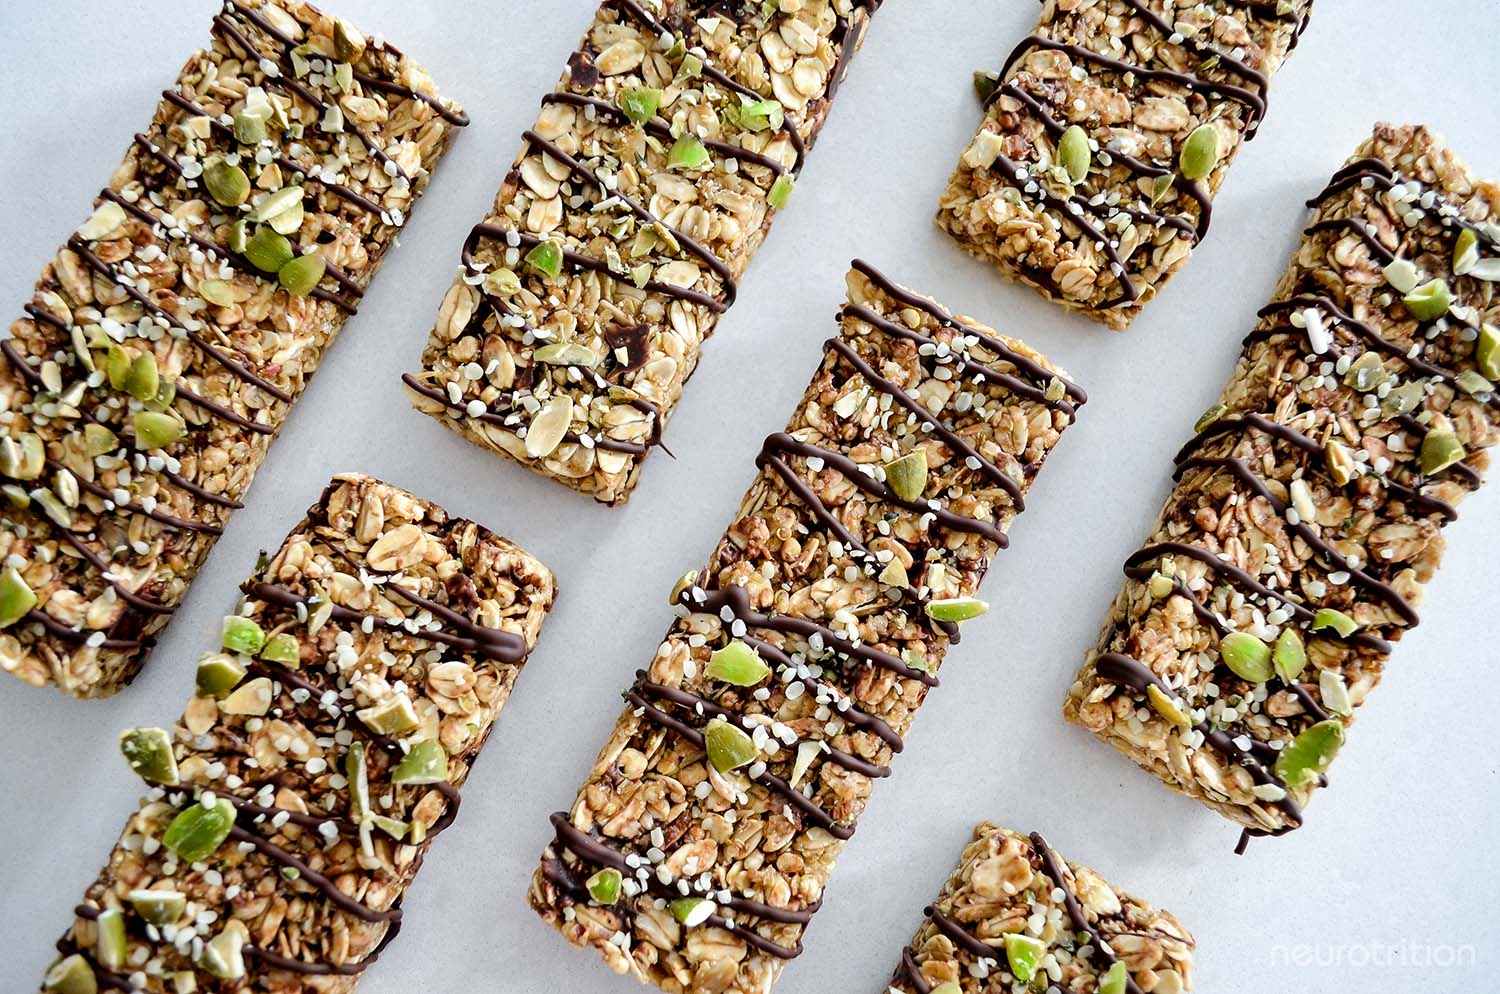 Flatlay of several granola bars in a grid formation, with chocolate drizzled across all the bars.